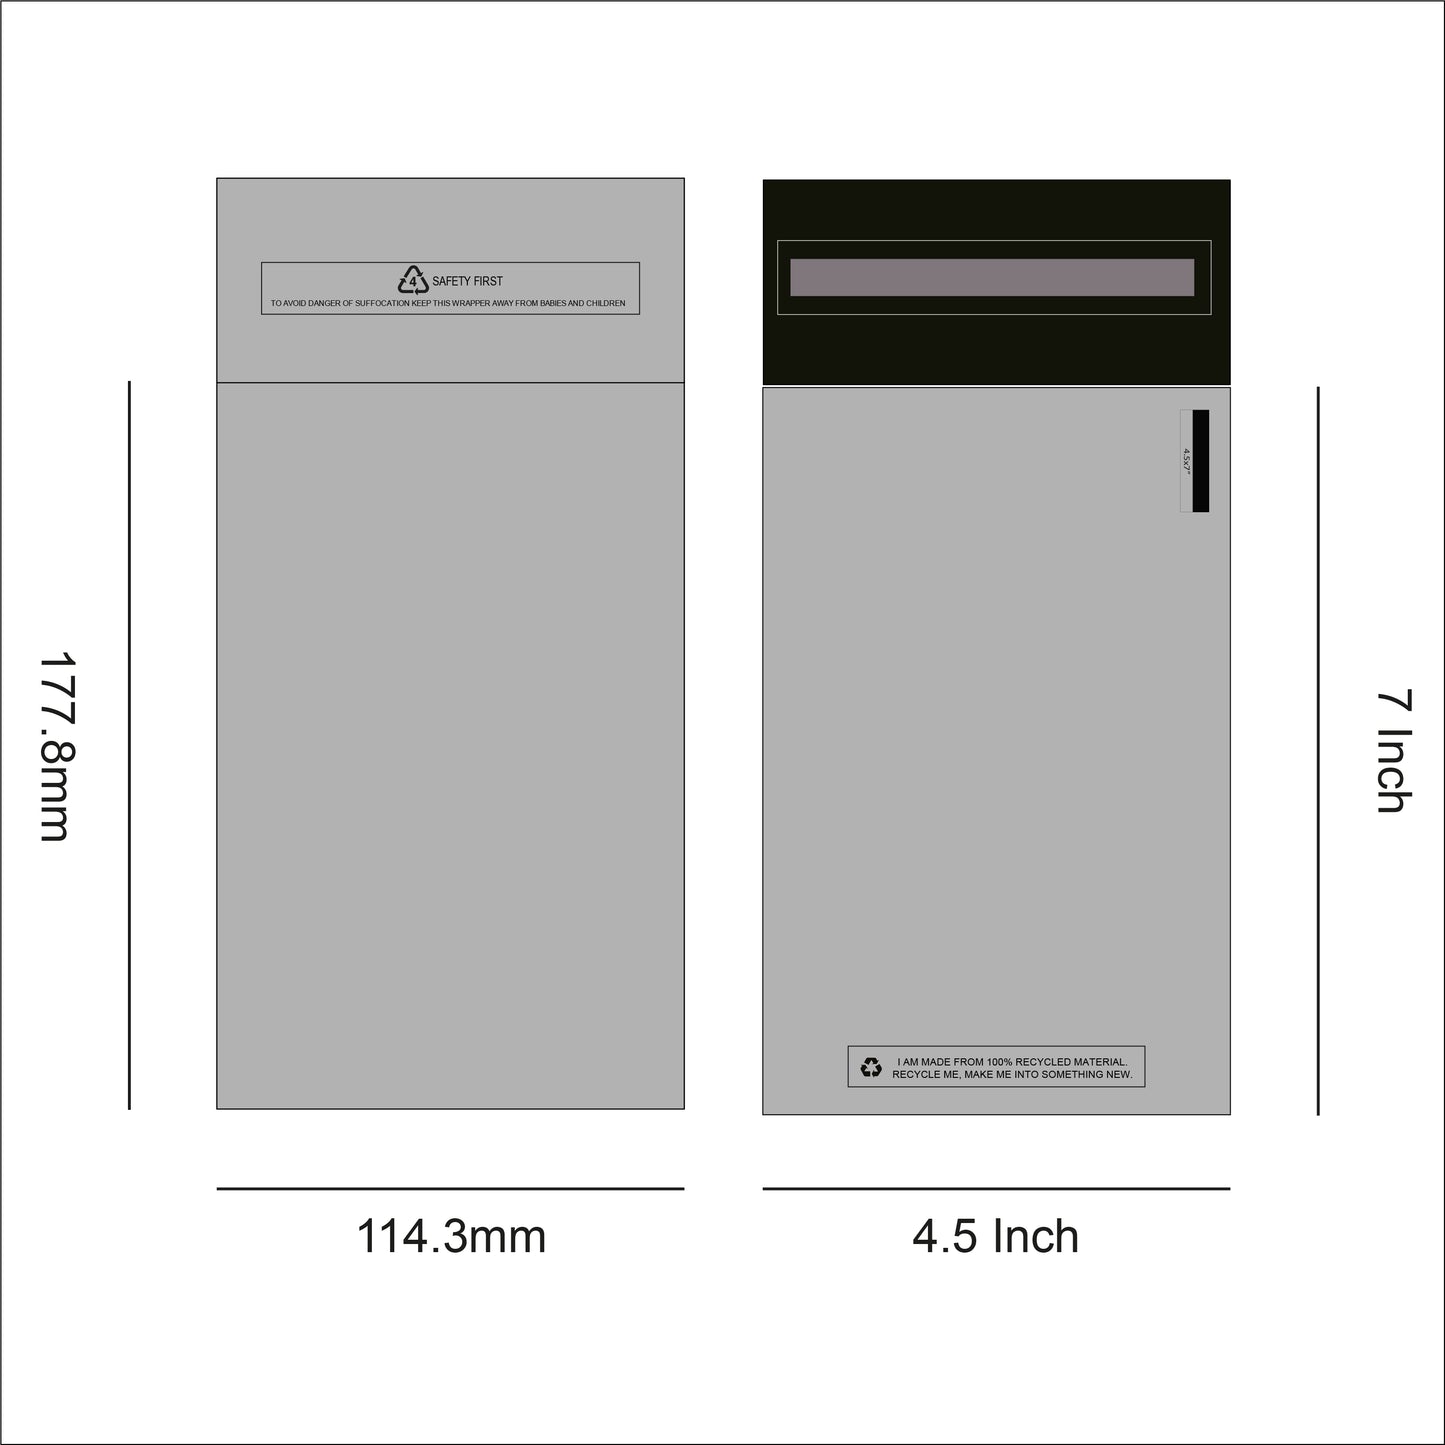 Design of Grey recycled Mail Bag 4.5 x 7 inches for packaging products